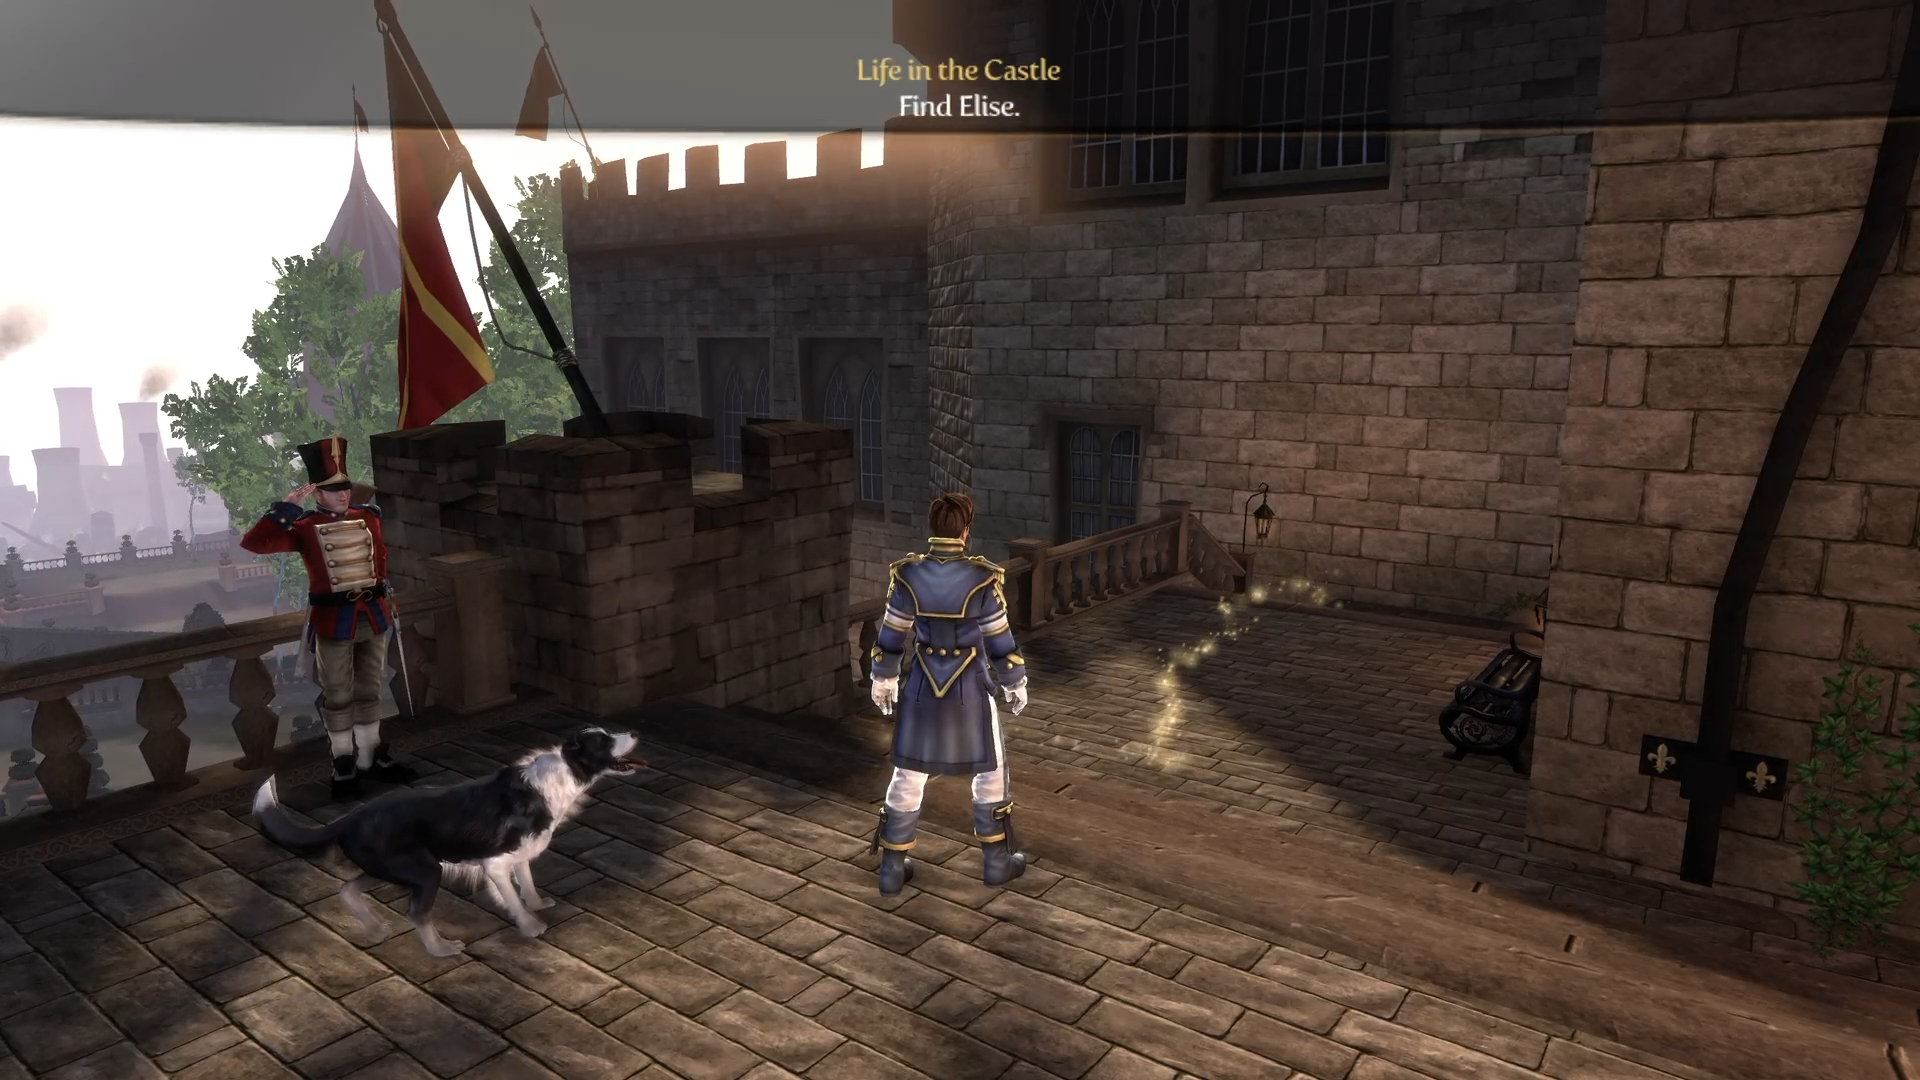 Fable III screenshot with the player character following a sparkly yellow path on the ground. text says "Life in the Castle. Find Elise."